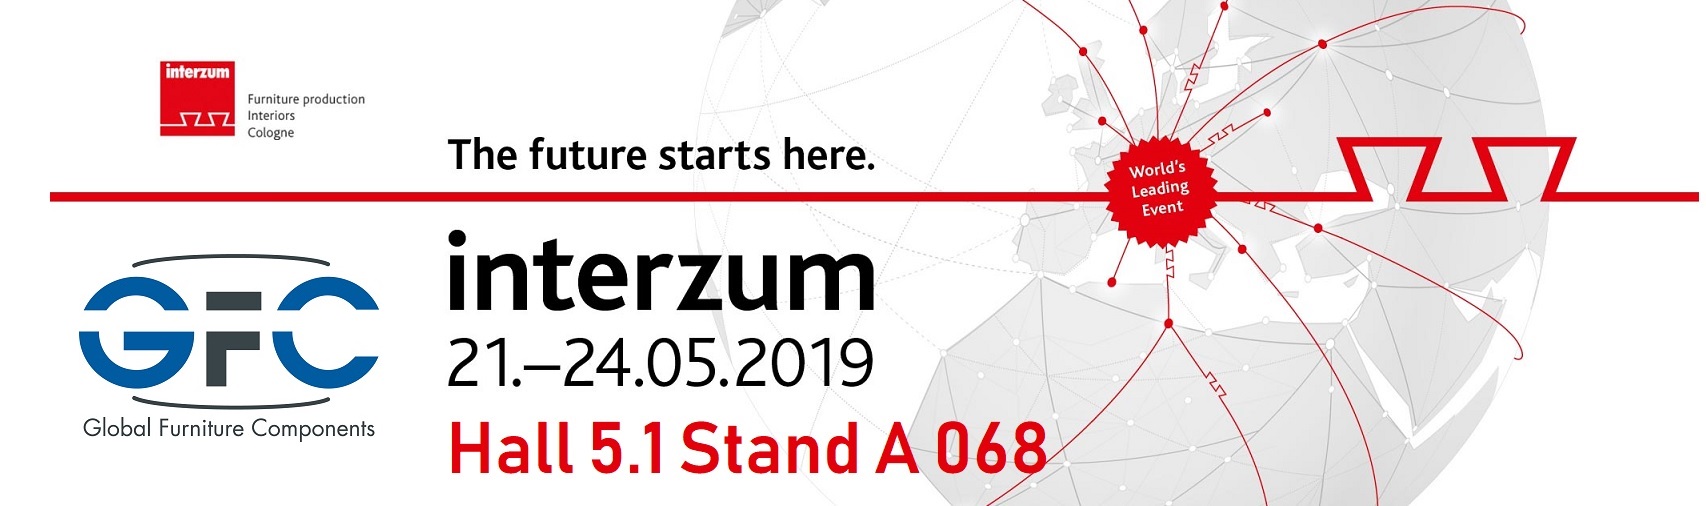 GFC set to return to Interzum Cologne 2019